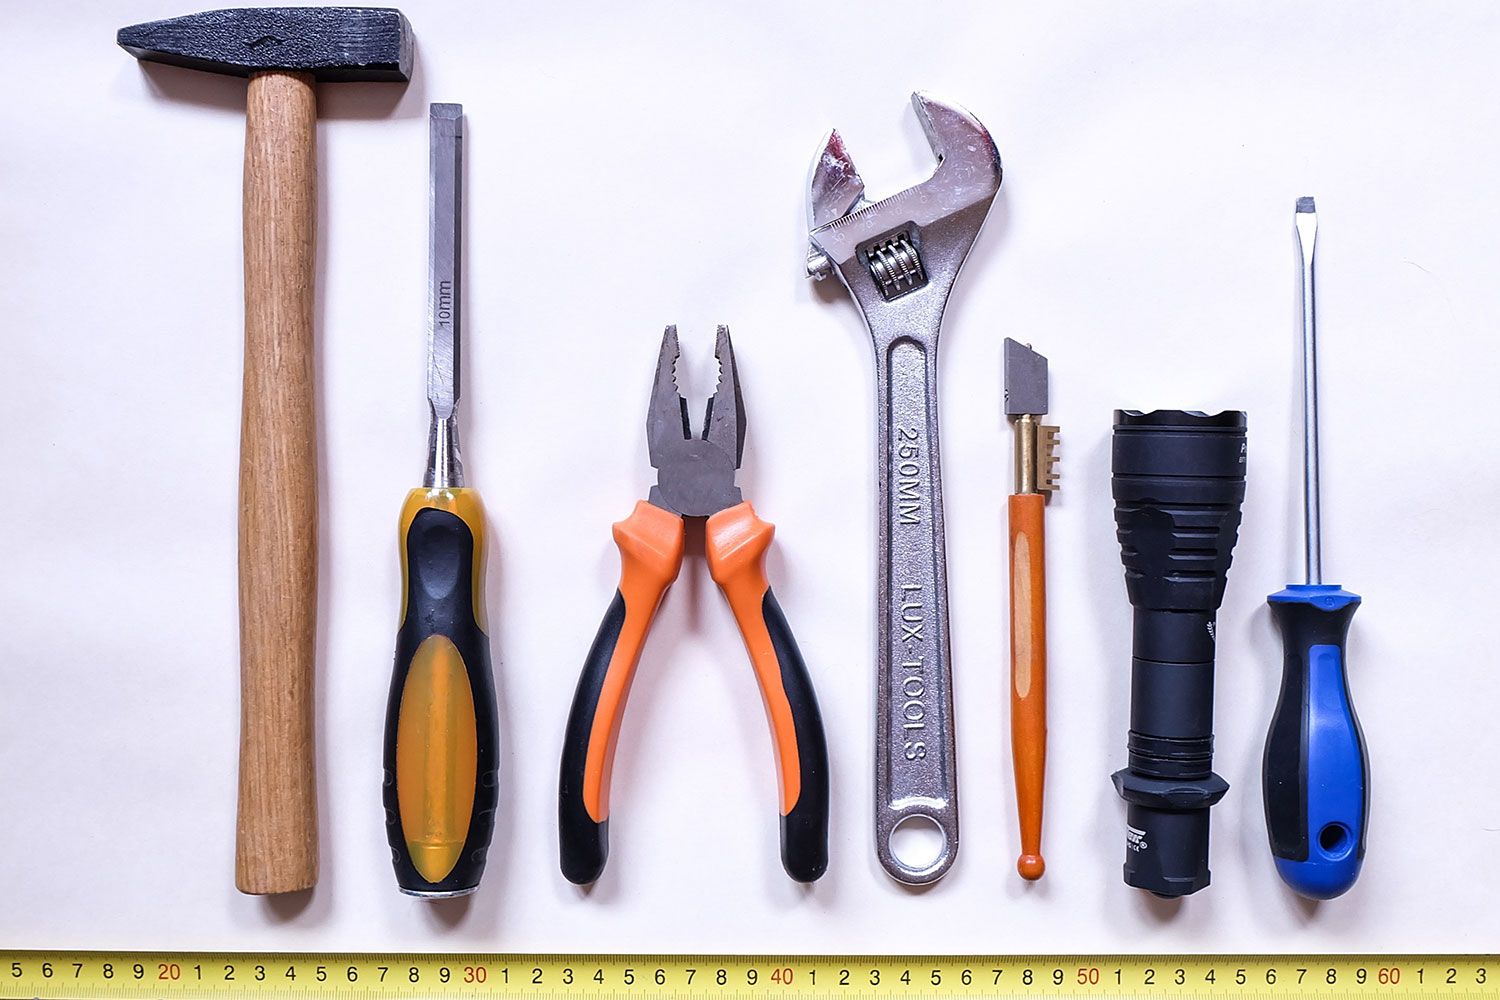 Infinity ProServ can provide handyman services to meet with your needs, from single jobs to whole to-do lists